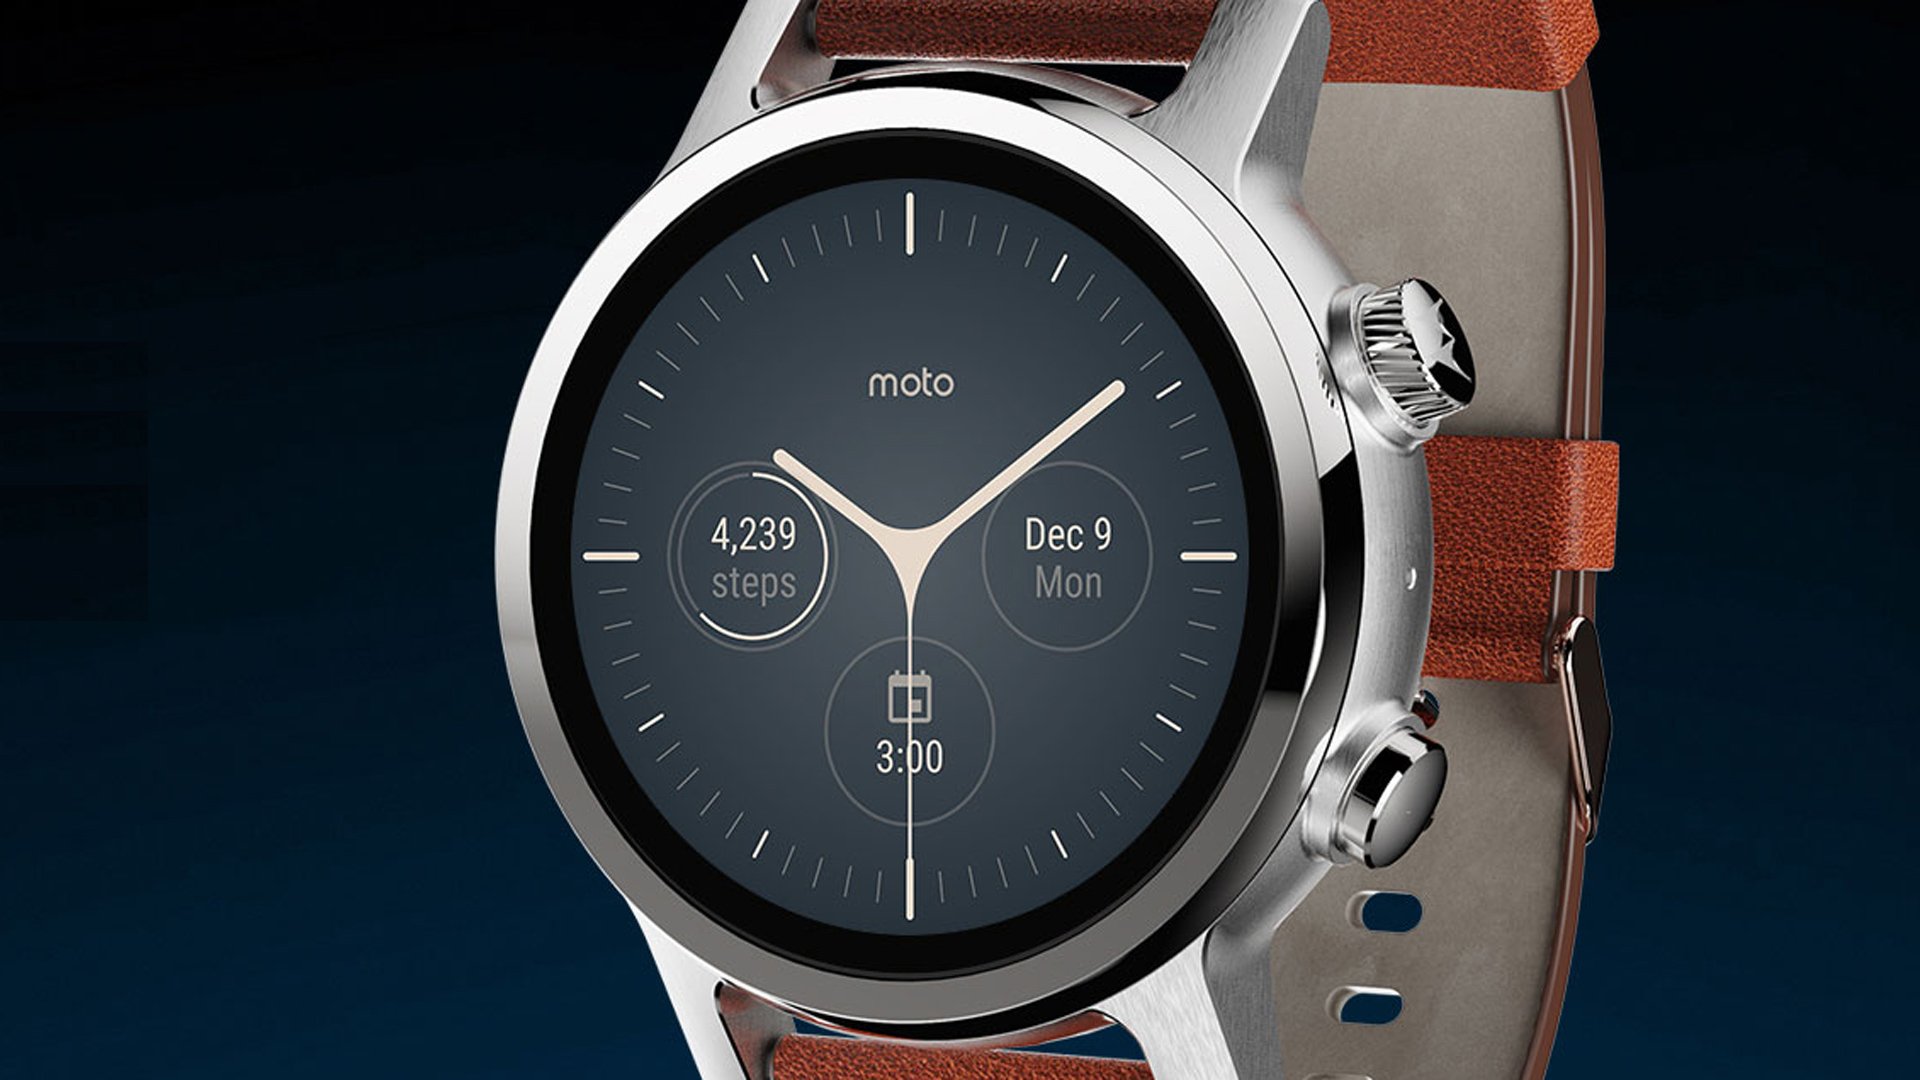 The Moto smartwatch is revived, but not to Motorola | NextPit